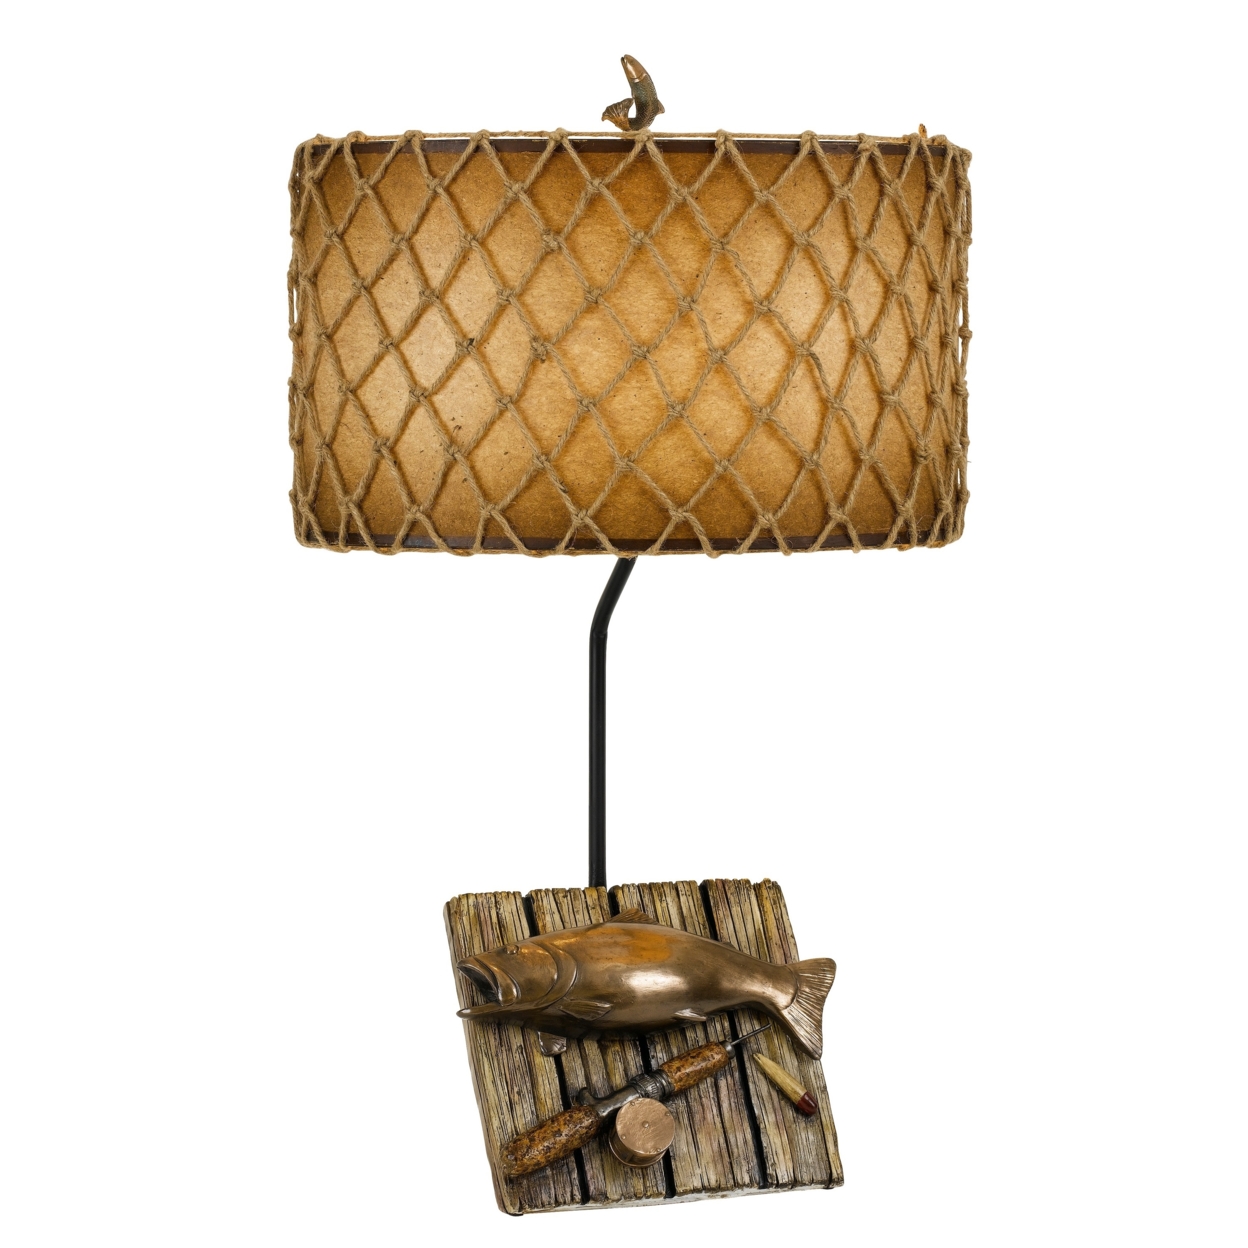 Fishing Theme Resin Table Lamp With Net Accent Paper Drum Shade, Beige- Saltoro Sherpi